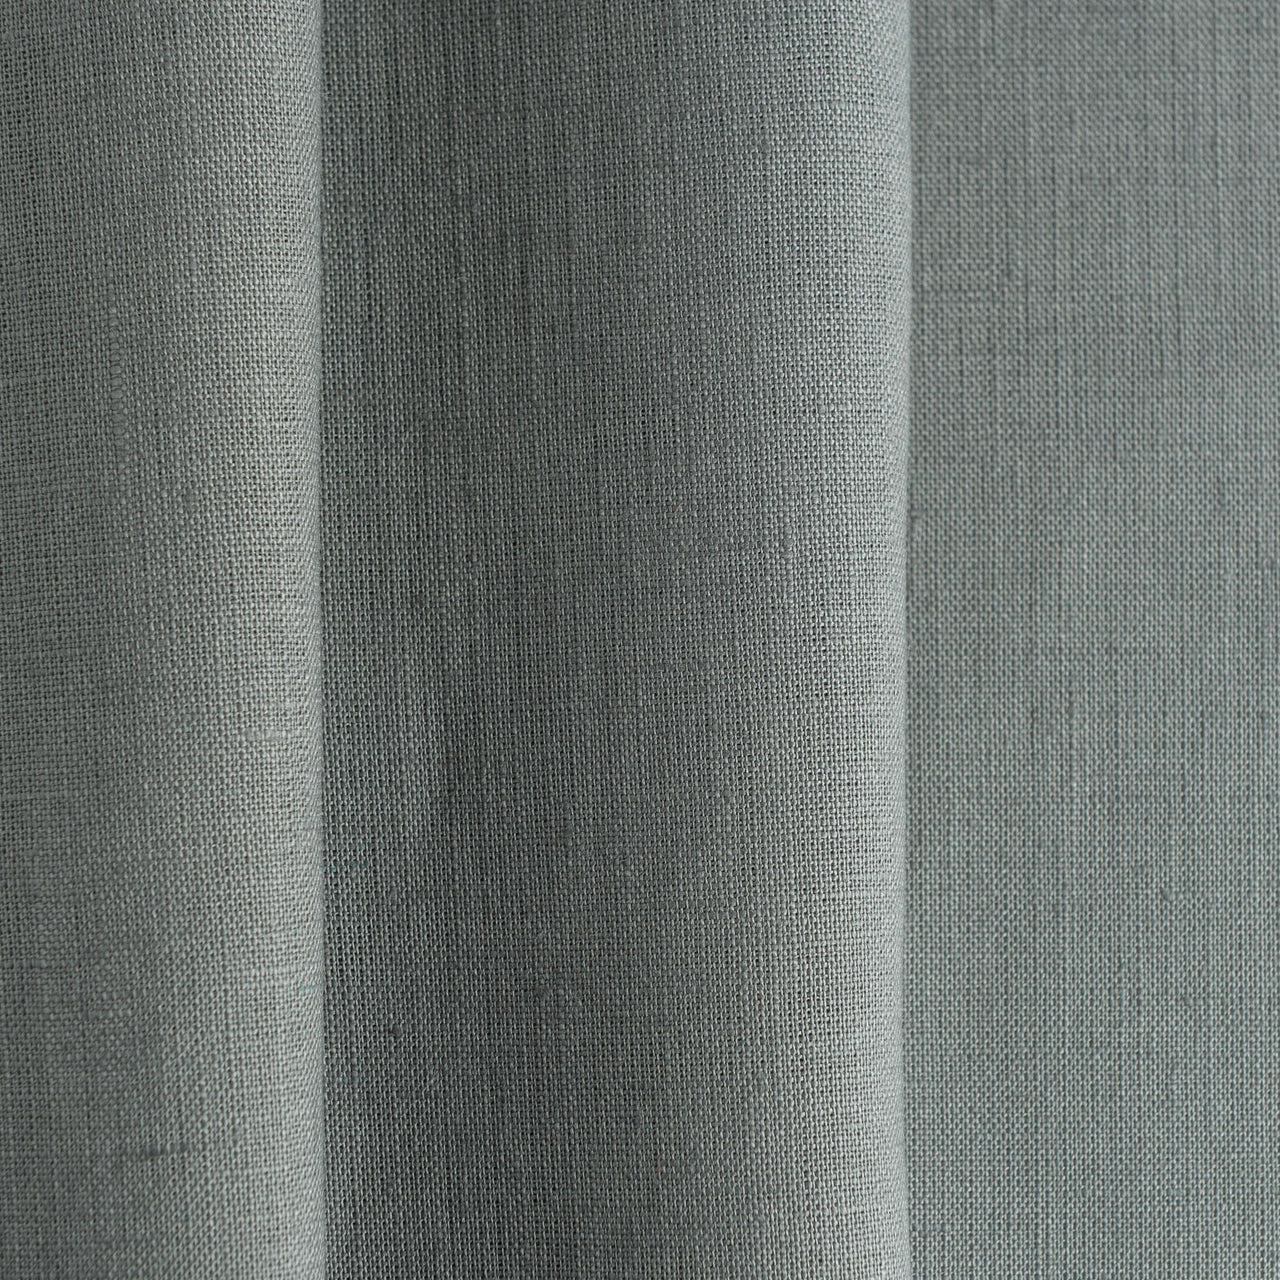 Dim Grey Fabric by the Meter - 100% French Natural - Width 133 cm, 267 cm